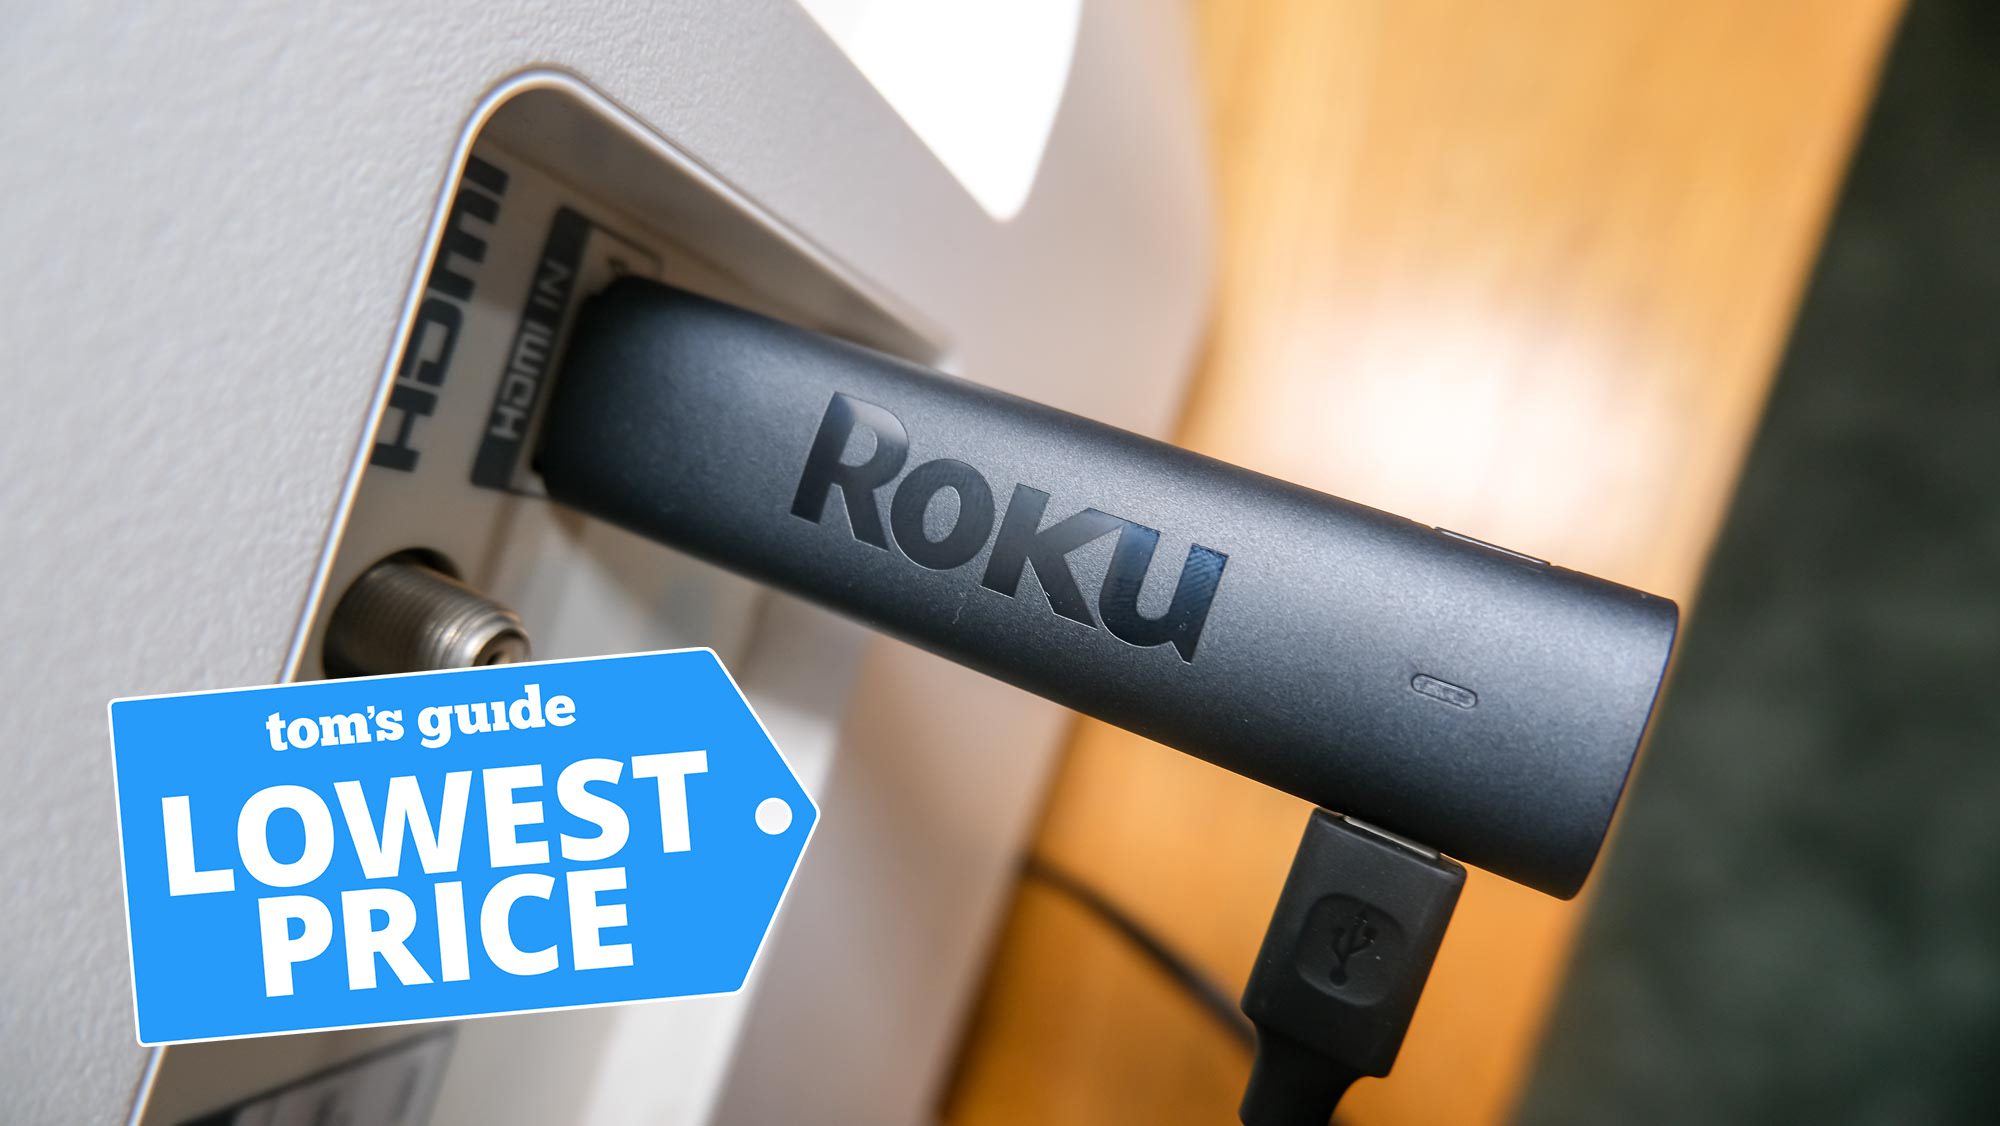 Roku Streaming Stick 4K is plugged into an HDMI port with Tom's Guide Lowest Price graphic on top